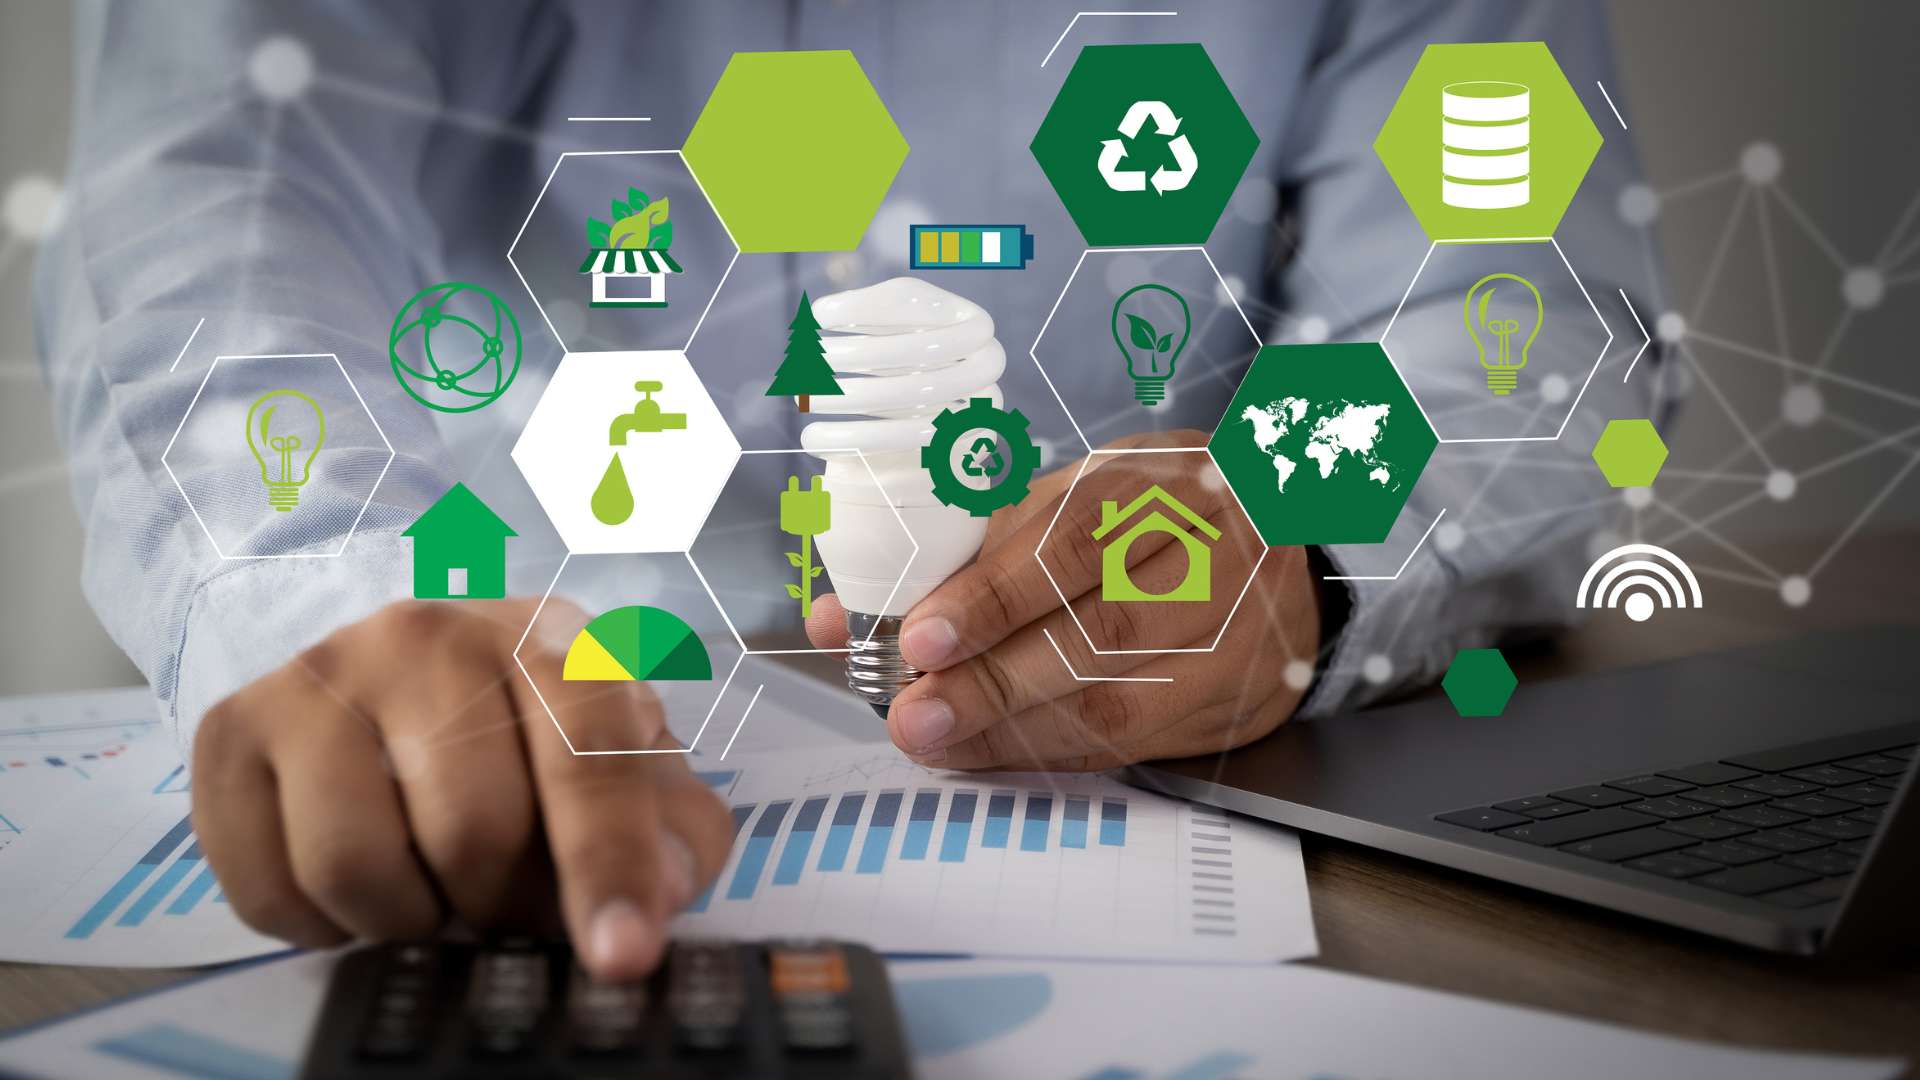 Sustainability reporting for SME's is becoming more important but can be demanding